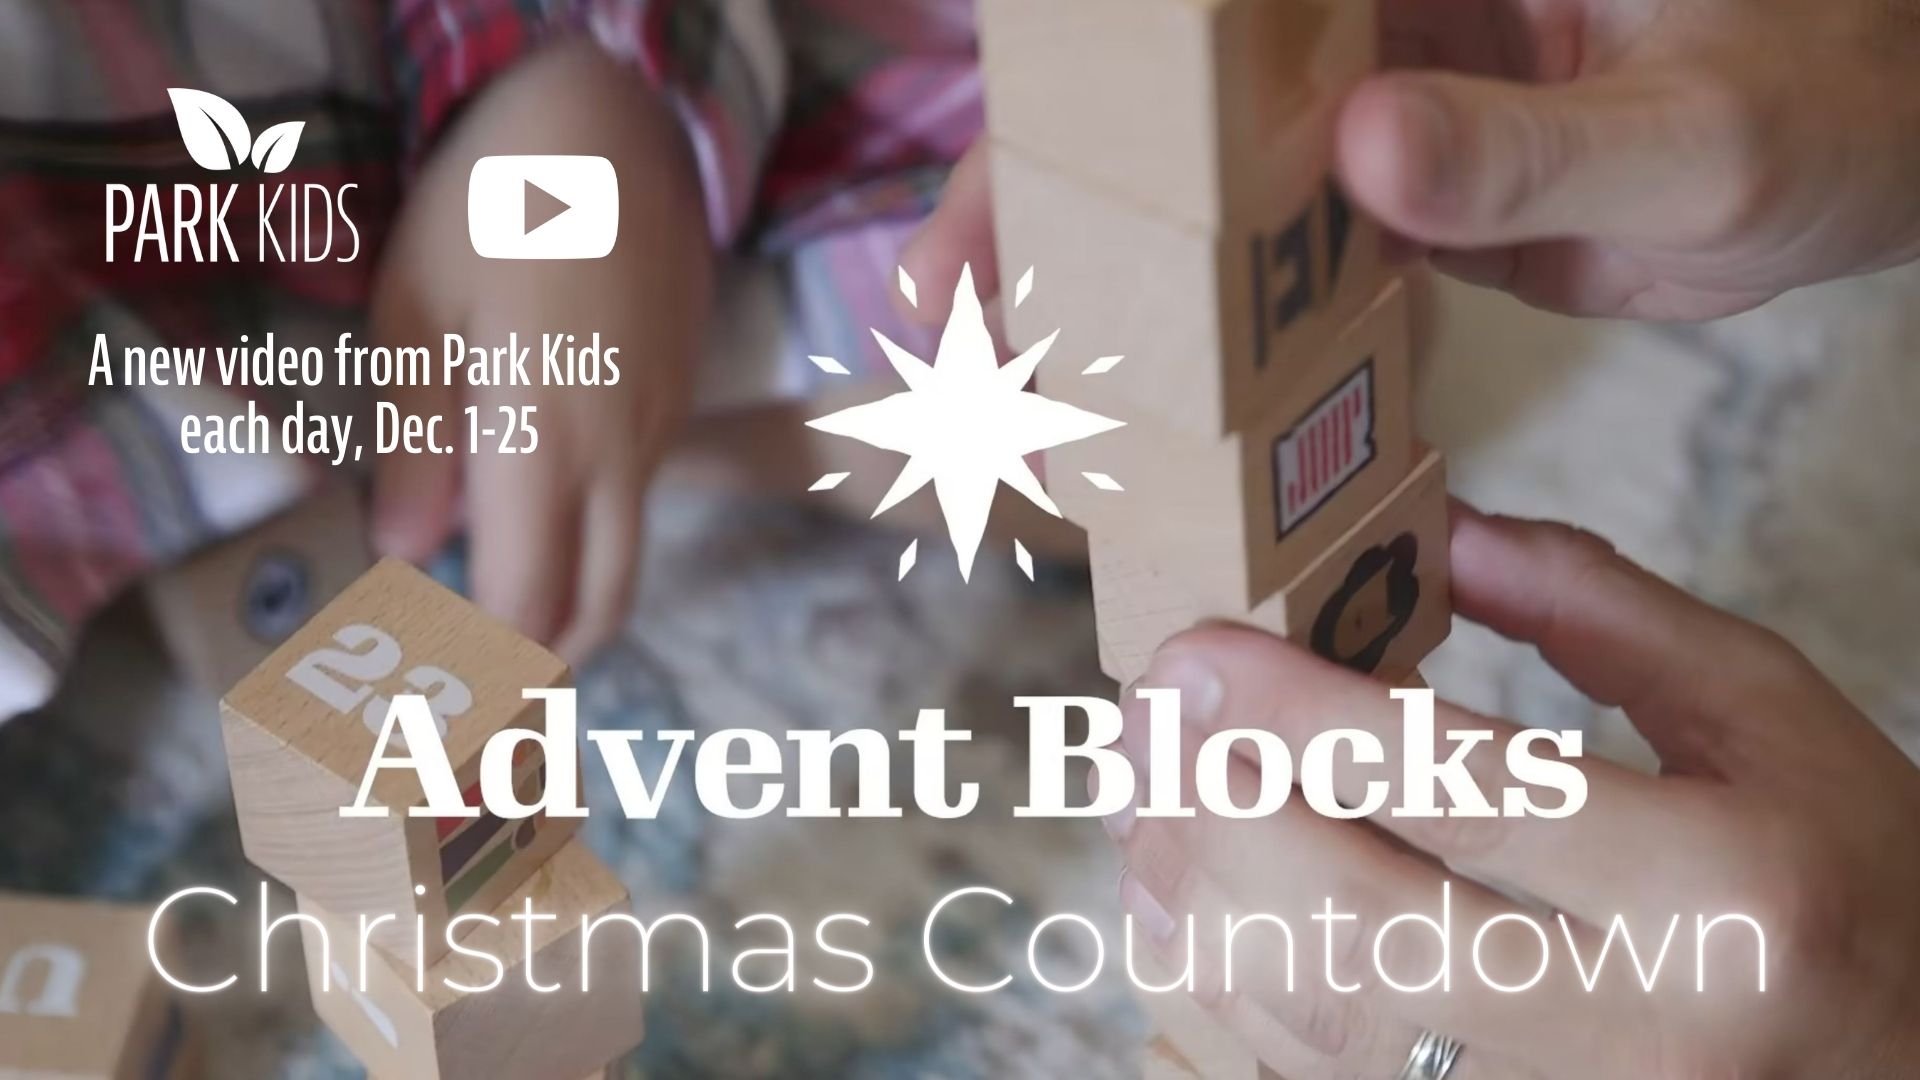 Close-up photo of child with wooden cube blocks and the Park Kids, YouTube and Advent Blocks logos